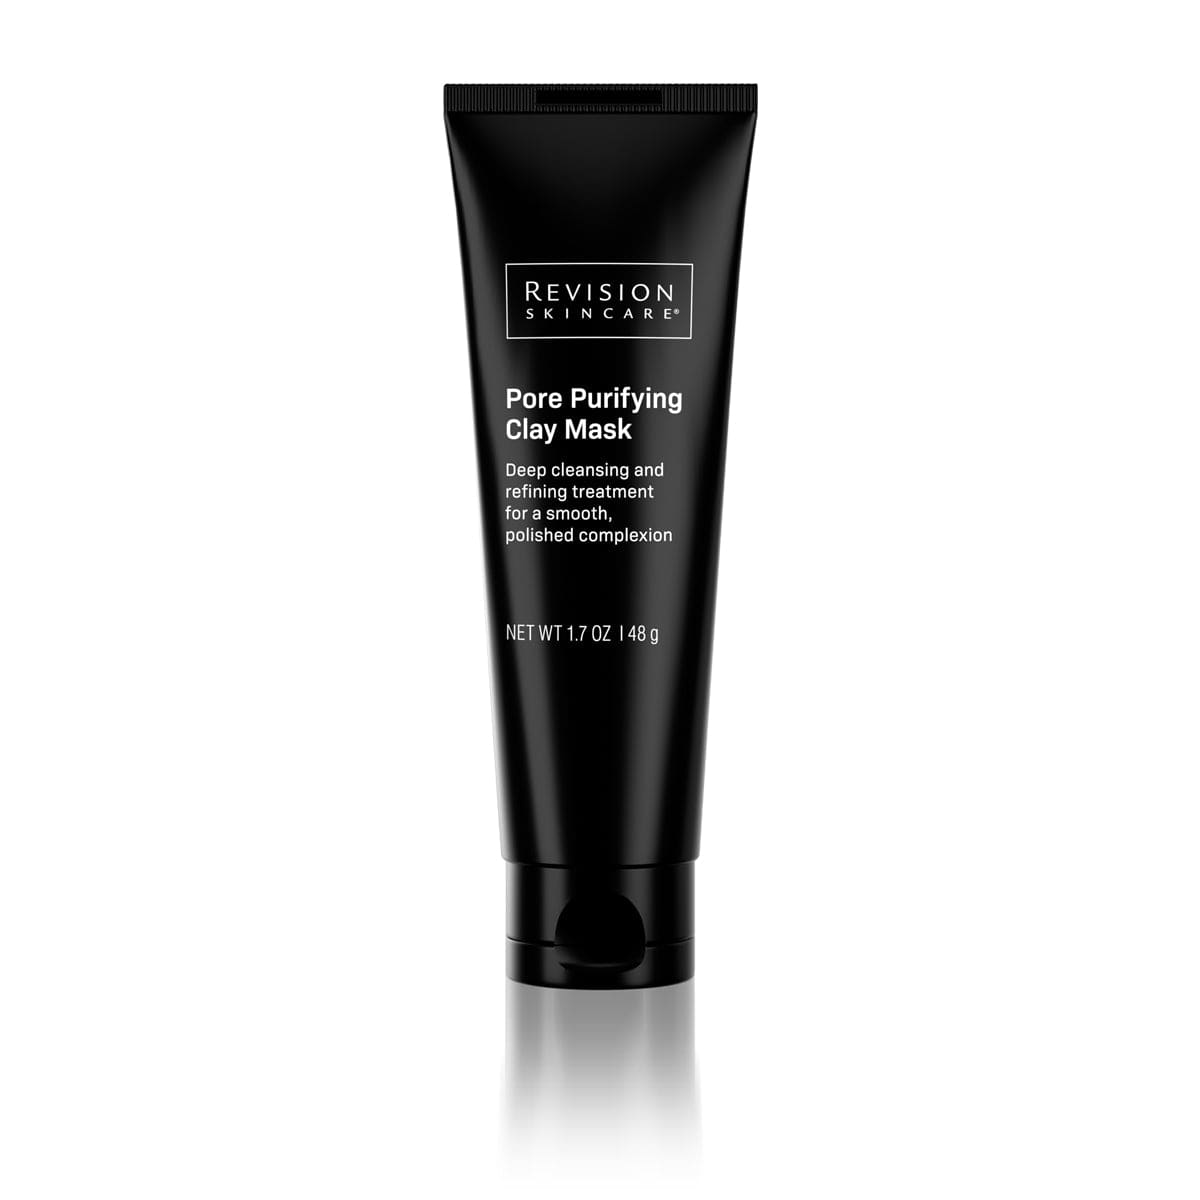 Pore Purifying Clay Mask (Formerly Mask) |